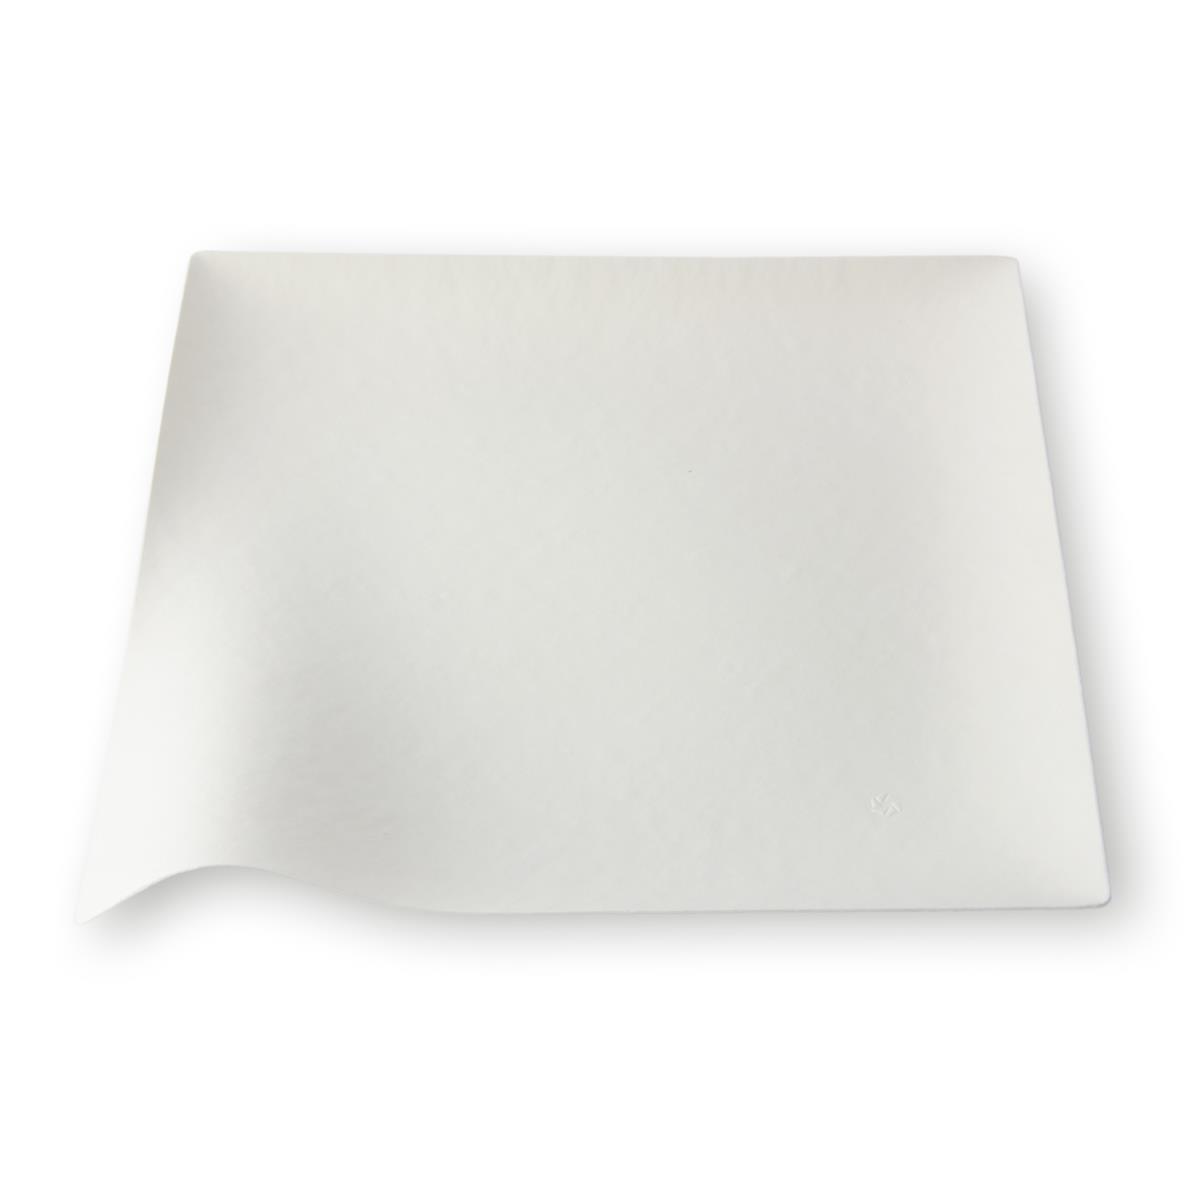 Picture of Asean DM-015A 10 in. Compostable Plate, White - Extra Large - Square